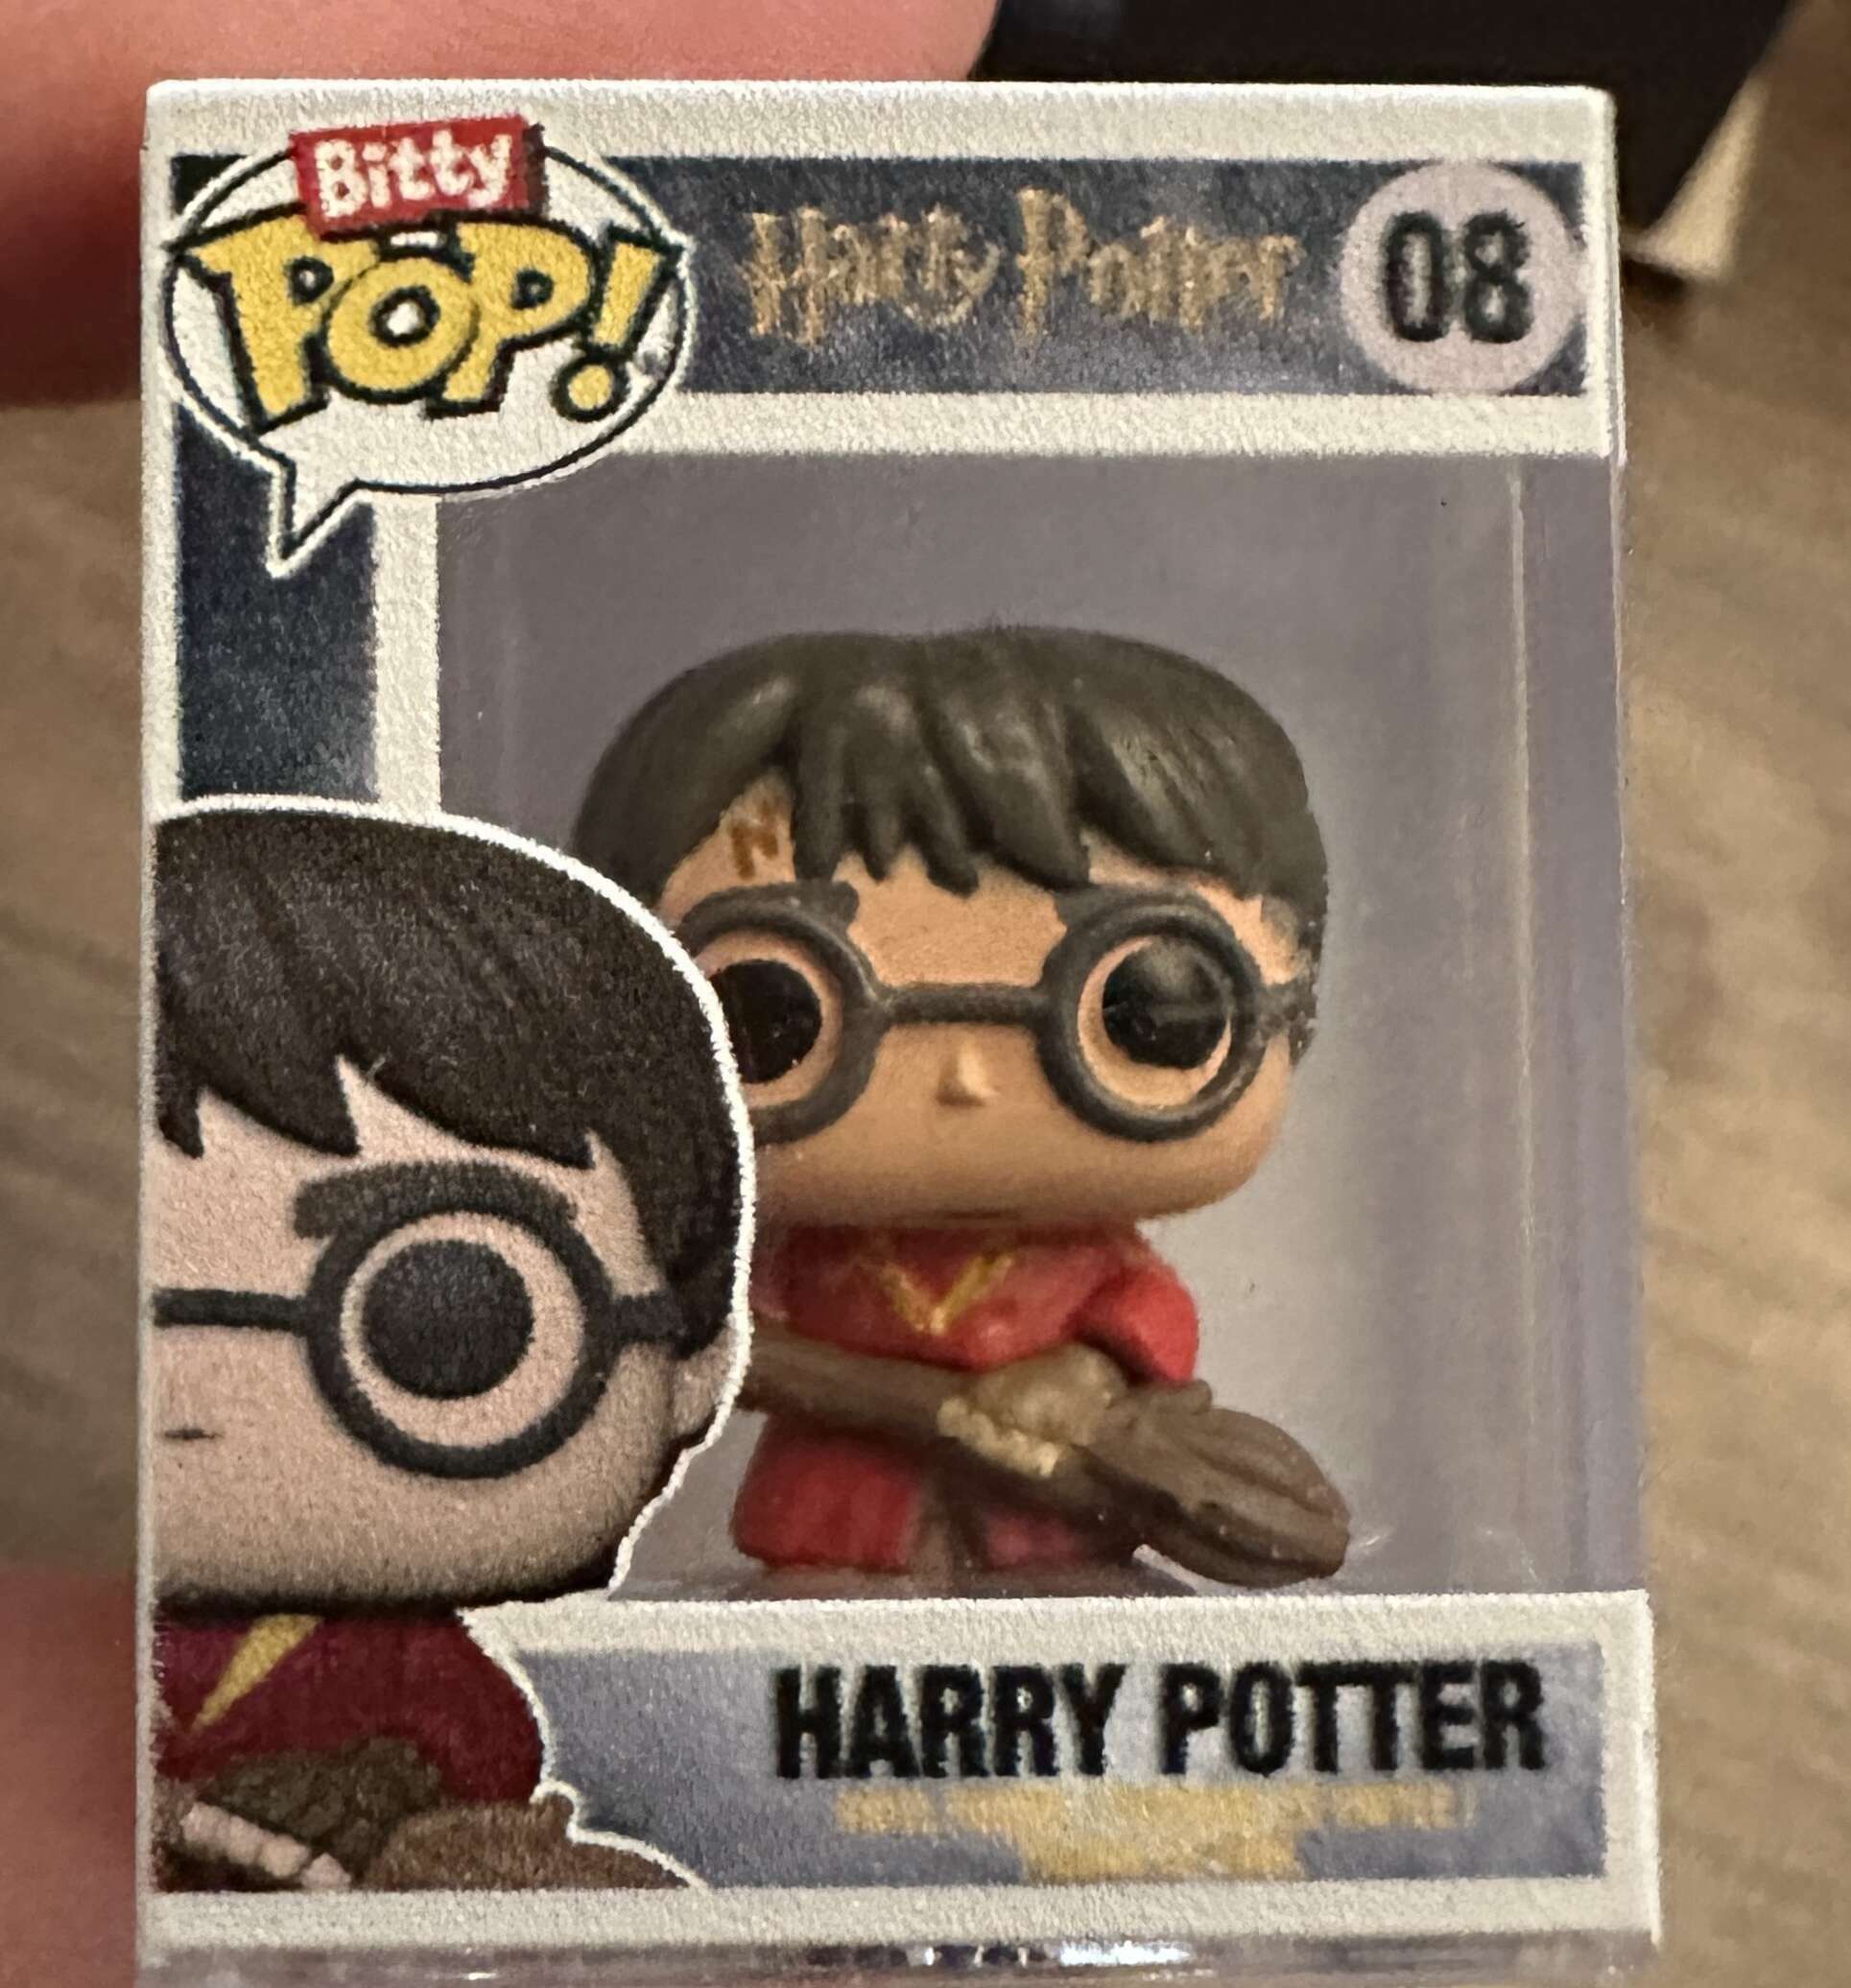 Harry Potter with Quidditch Broom Bitty Pop! Funko